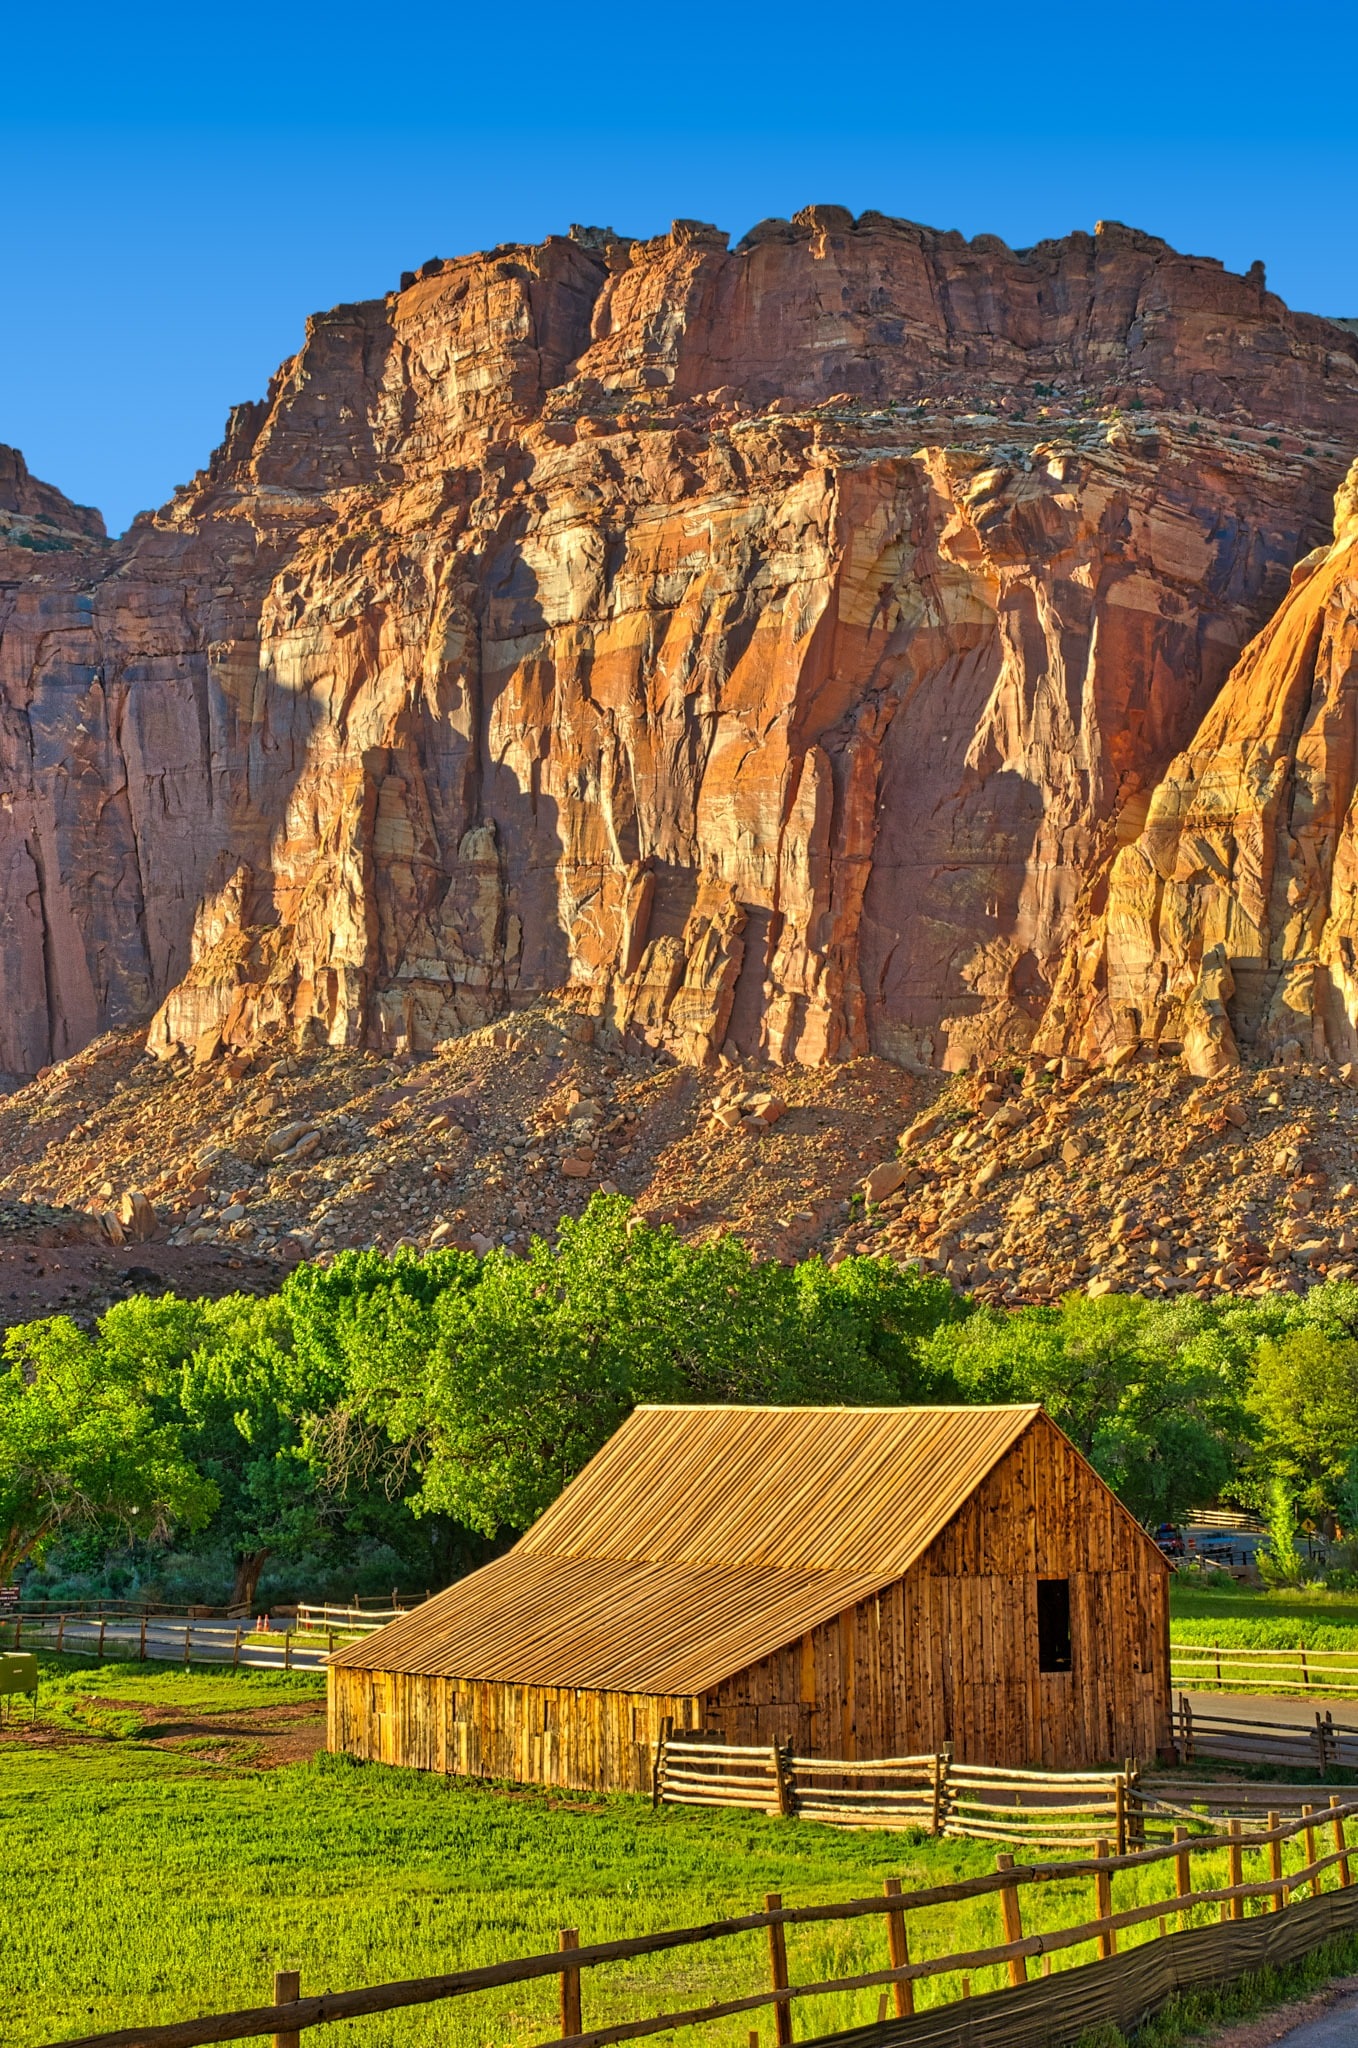 A view of one of the barns on the Gifford Homestead with red cliffs of the Waterpocket Fold in the background, in the Fruita District of Capitol Reef National Park in Utah.